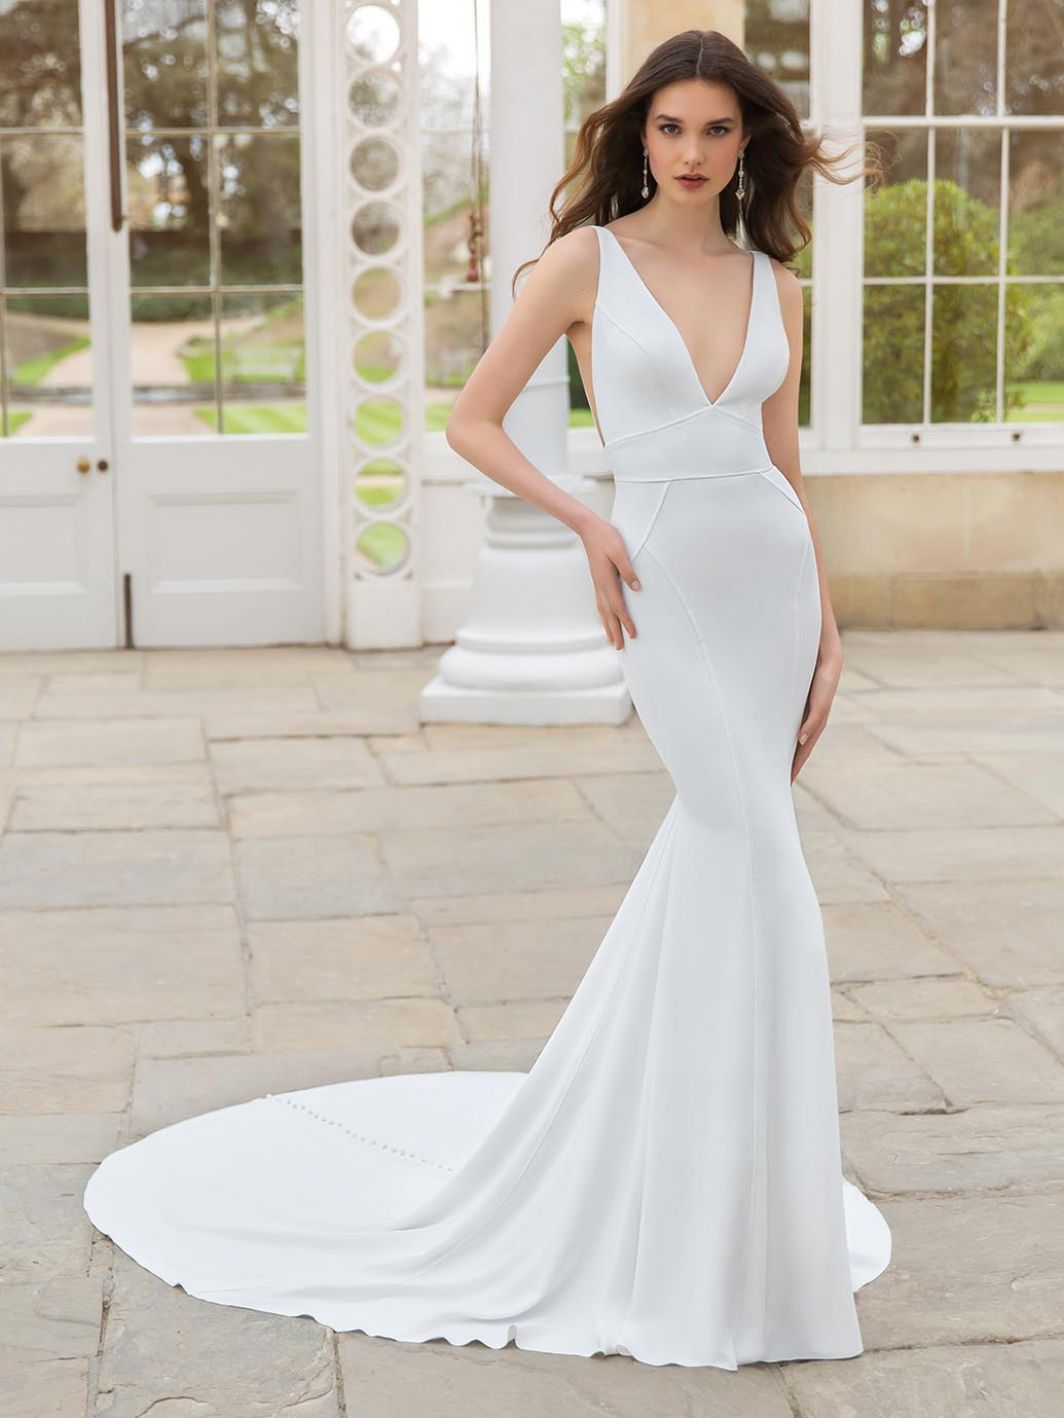 Body-hugging Wedding Gowns for Every Bride - Vows Bridal